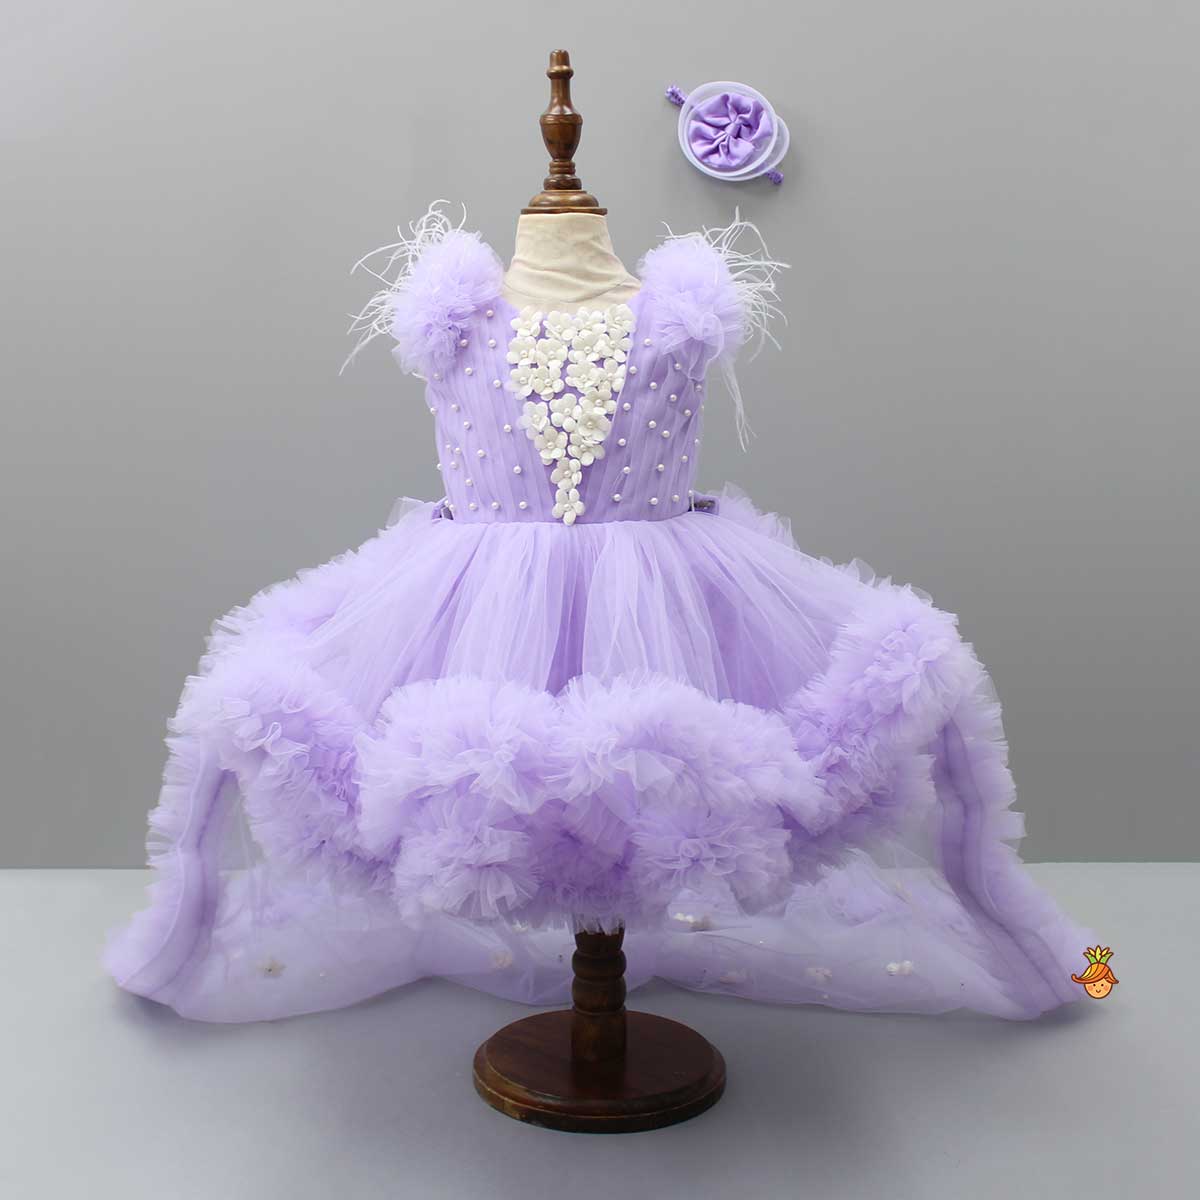 Pre Order: Ruffled Dress With Matching Bow And Swirled Bowie Headband